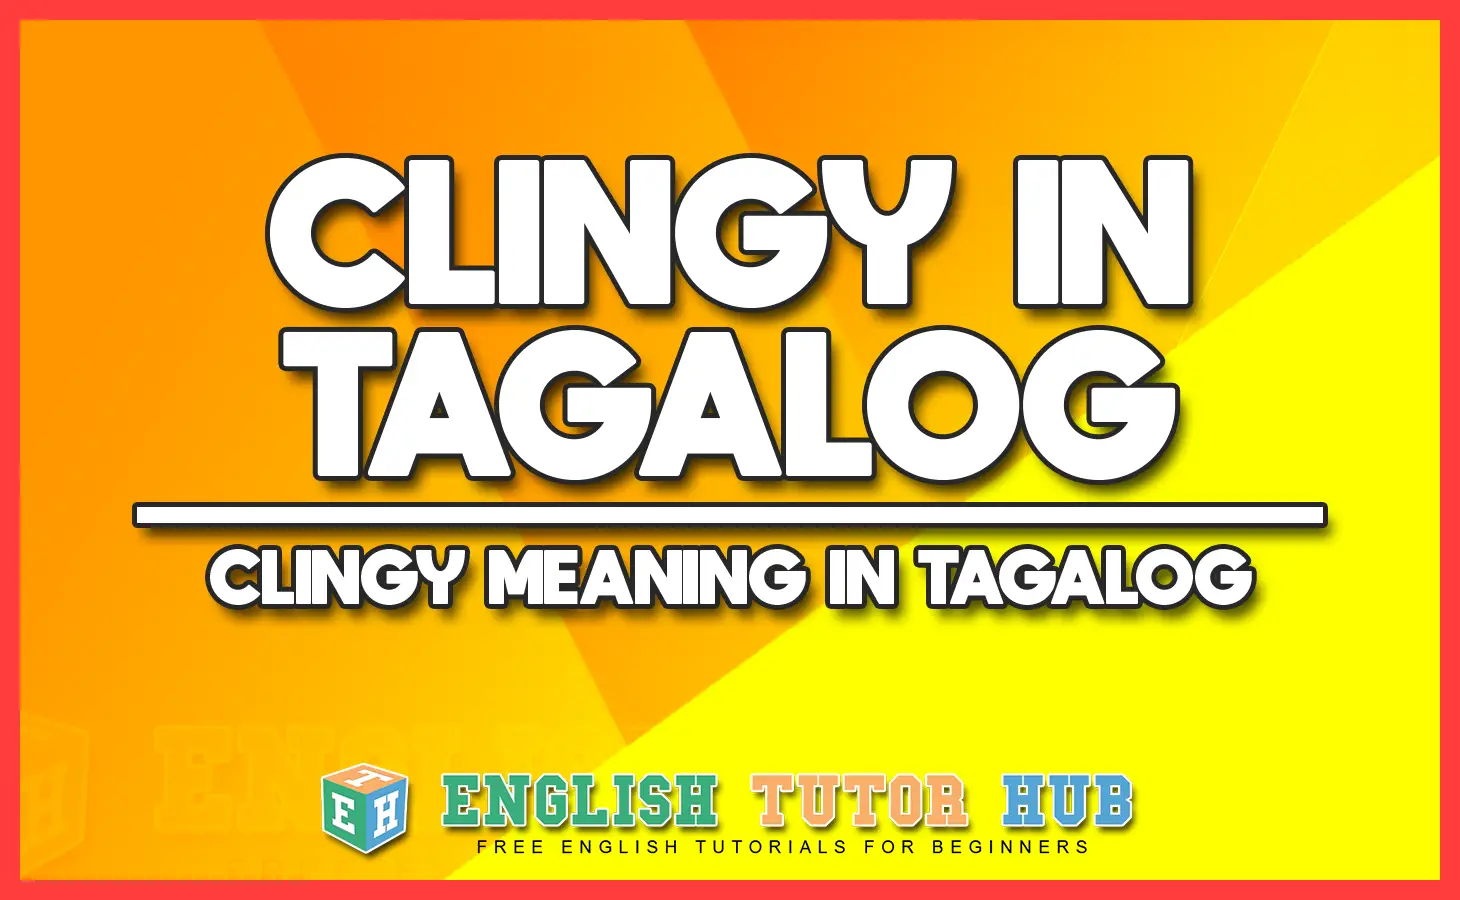 Clingy in Tagalog - Clingy Meaning in Tagalog